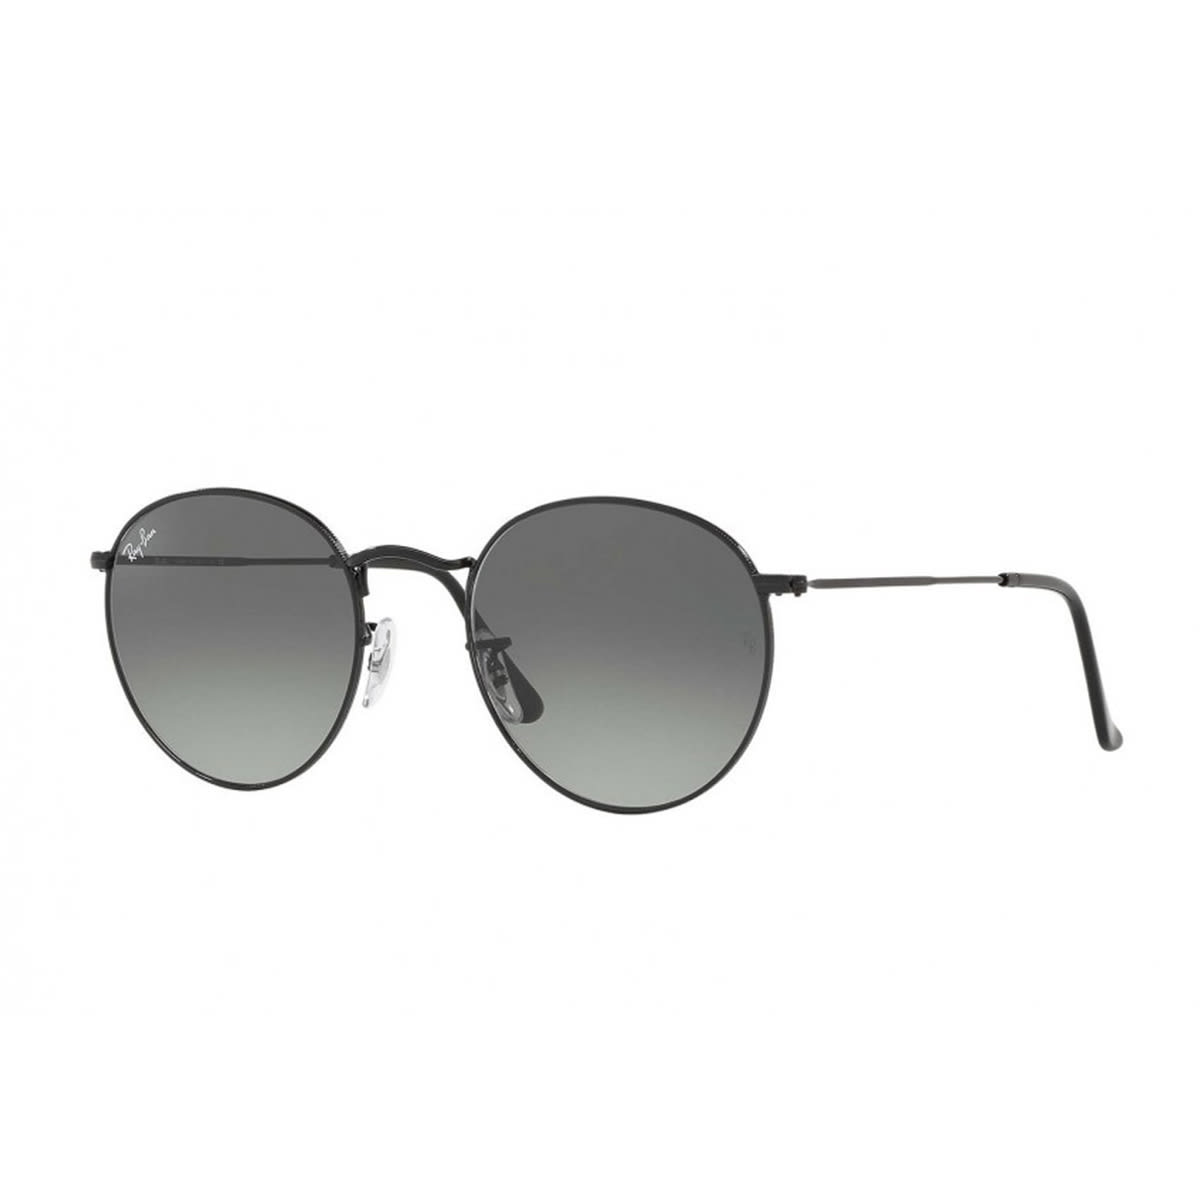 Ray Ban Men's Ray-ban Round Metal Rb3447n 002/71 Sunglasses In Black